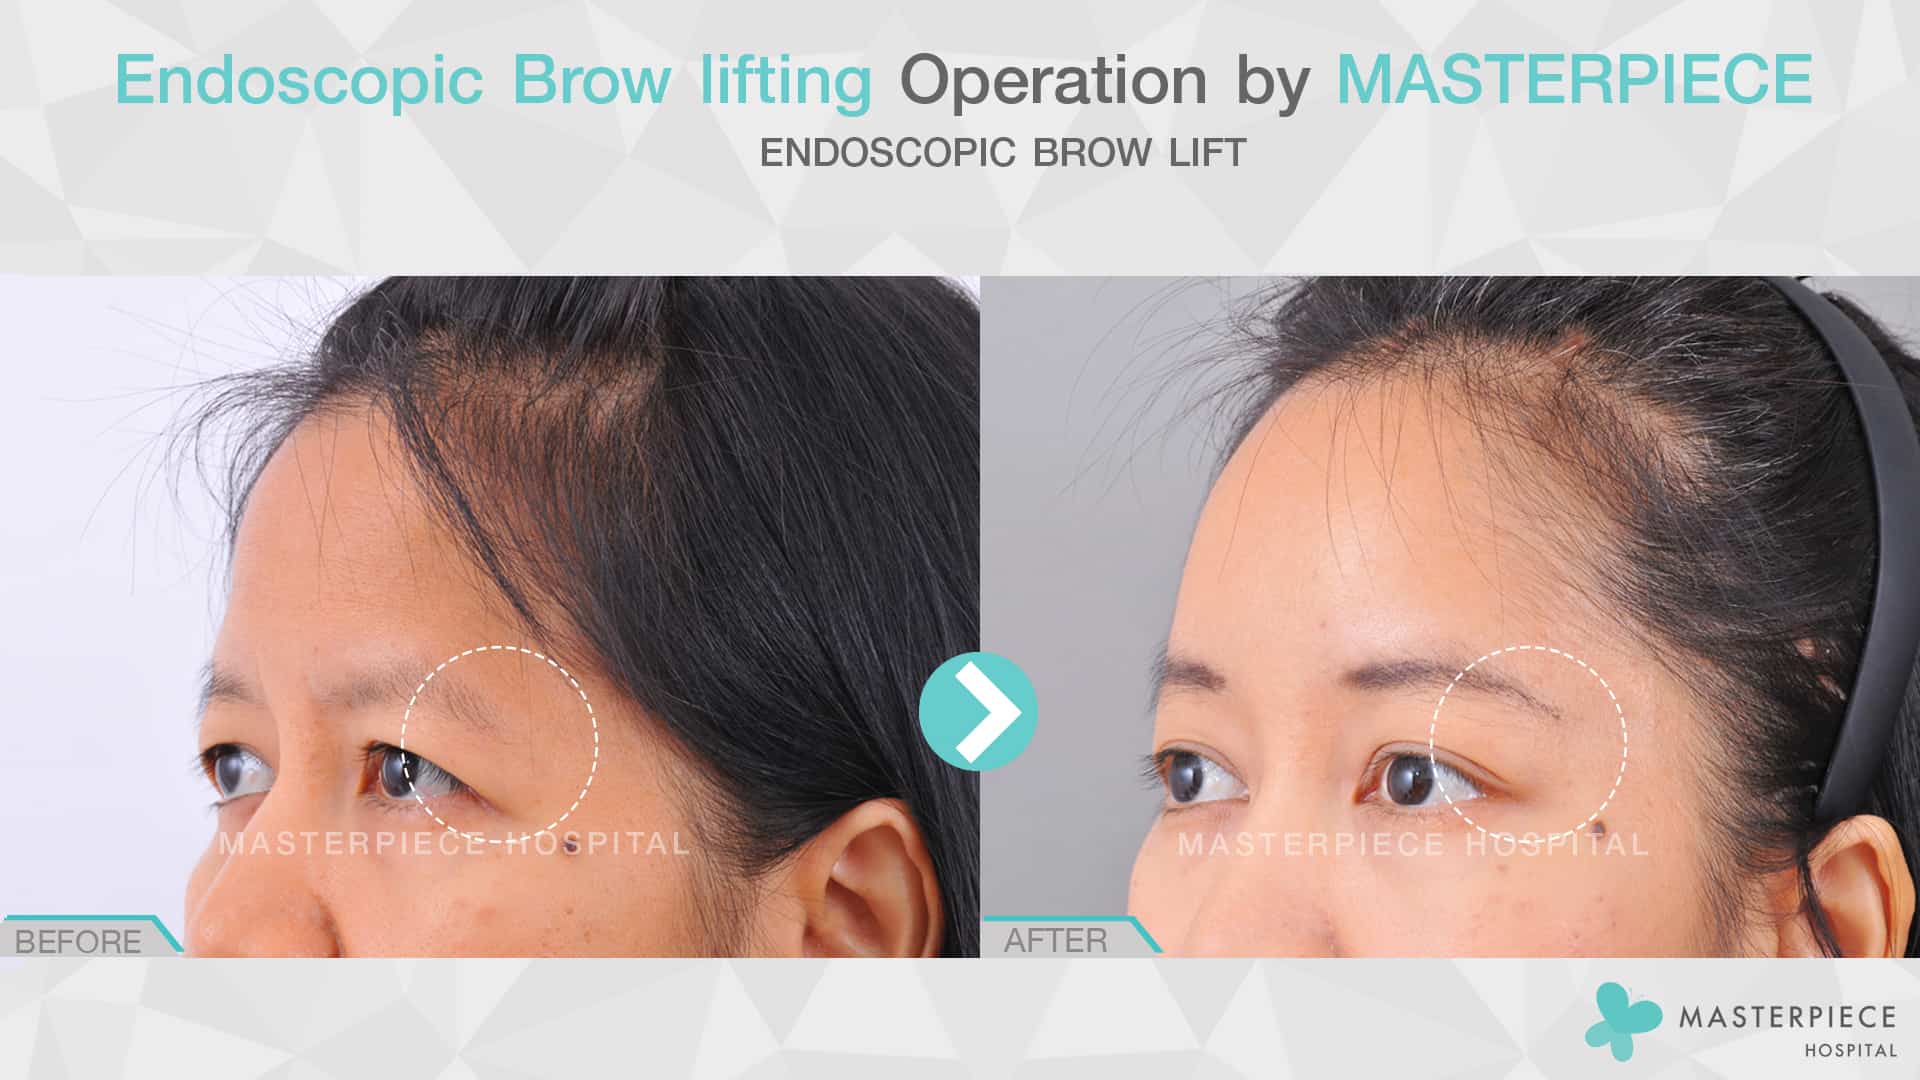 Endoscopic Brow lifting Operation by Masterpiece Hospital 1